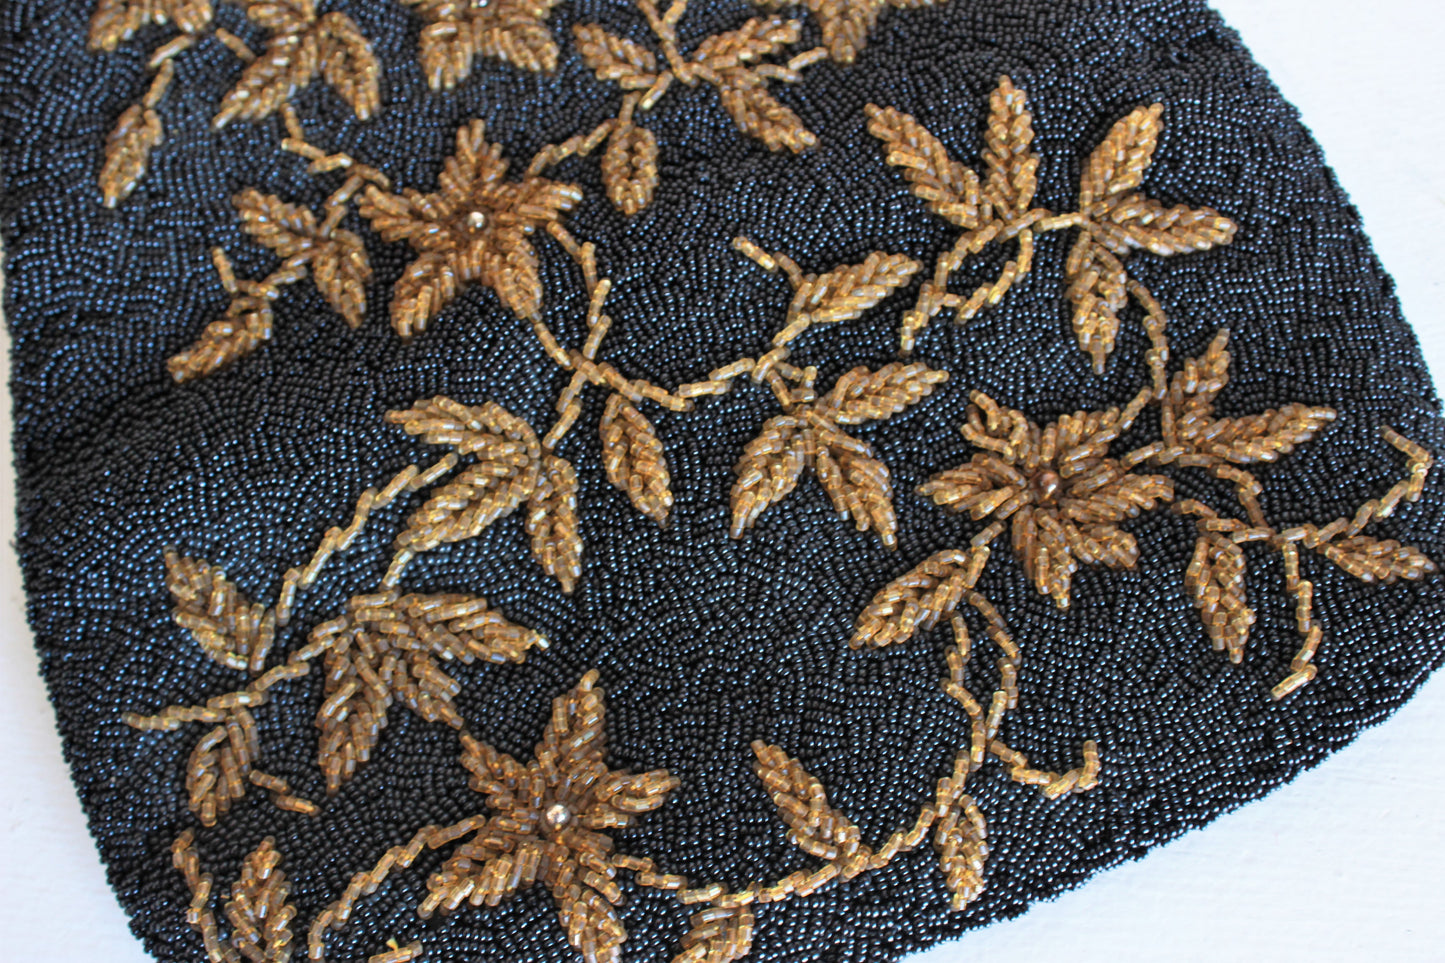 Vintage 1950s Beaded Clutch Bag With Golden Flowers